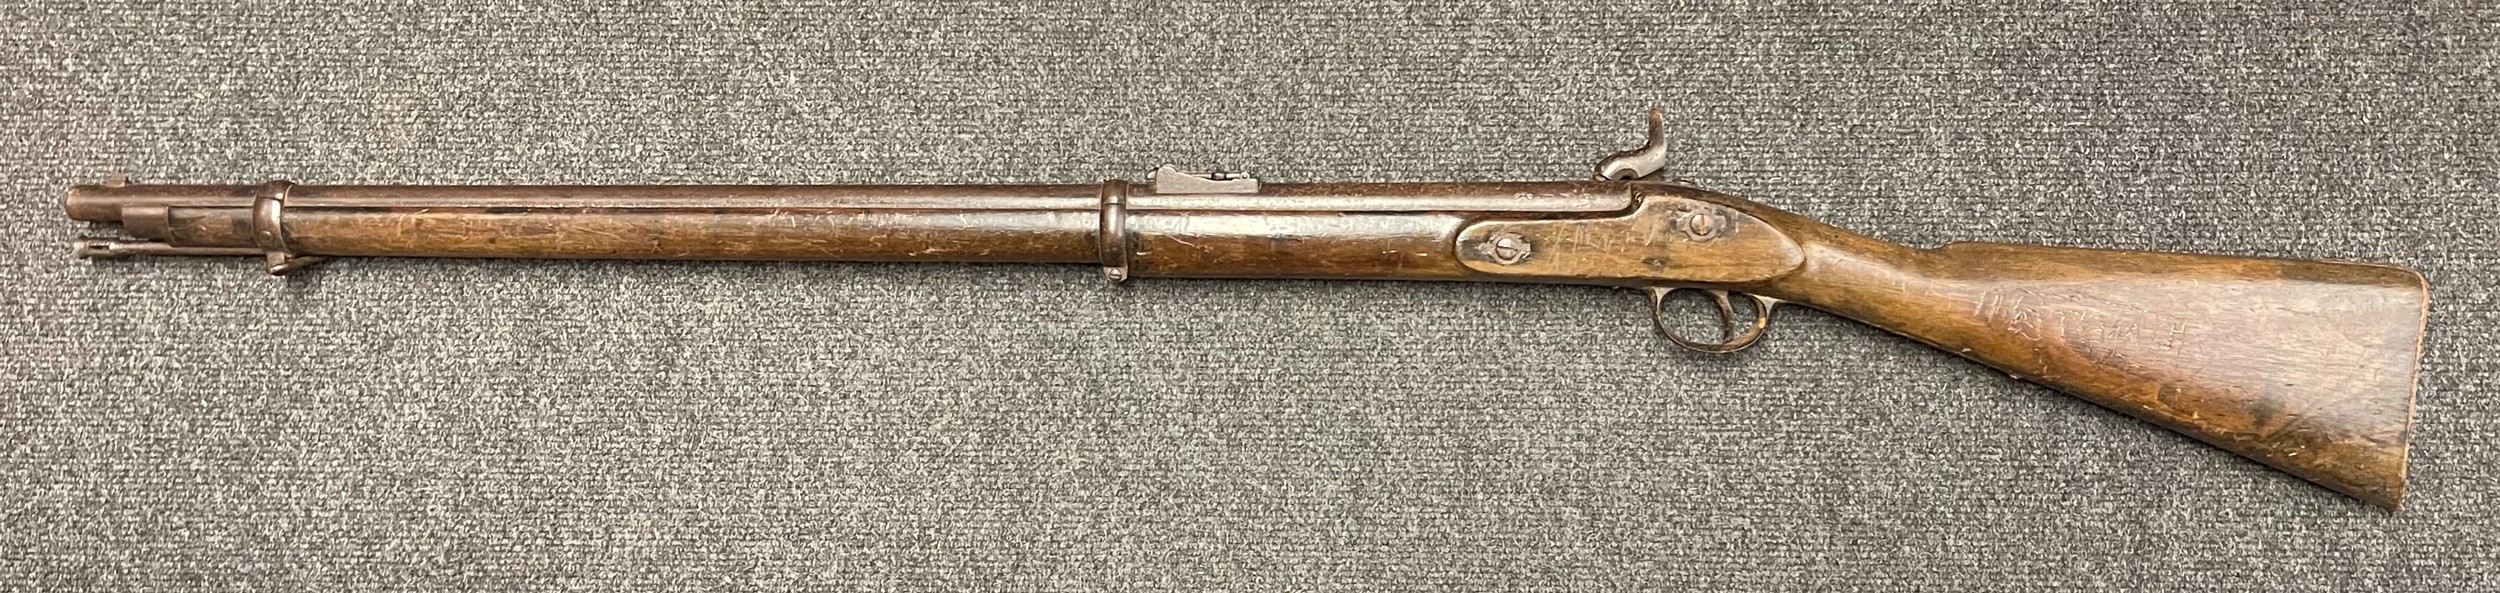 British Military "Bar on Band" Enfield Short Percussion Cap Rifle. Working action. 83cm long barrel. - Image 2 of 24